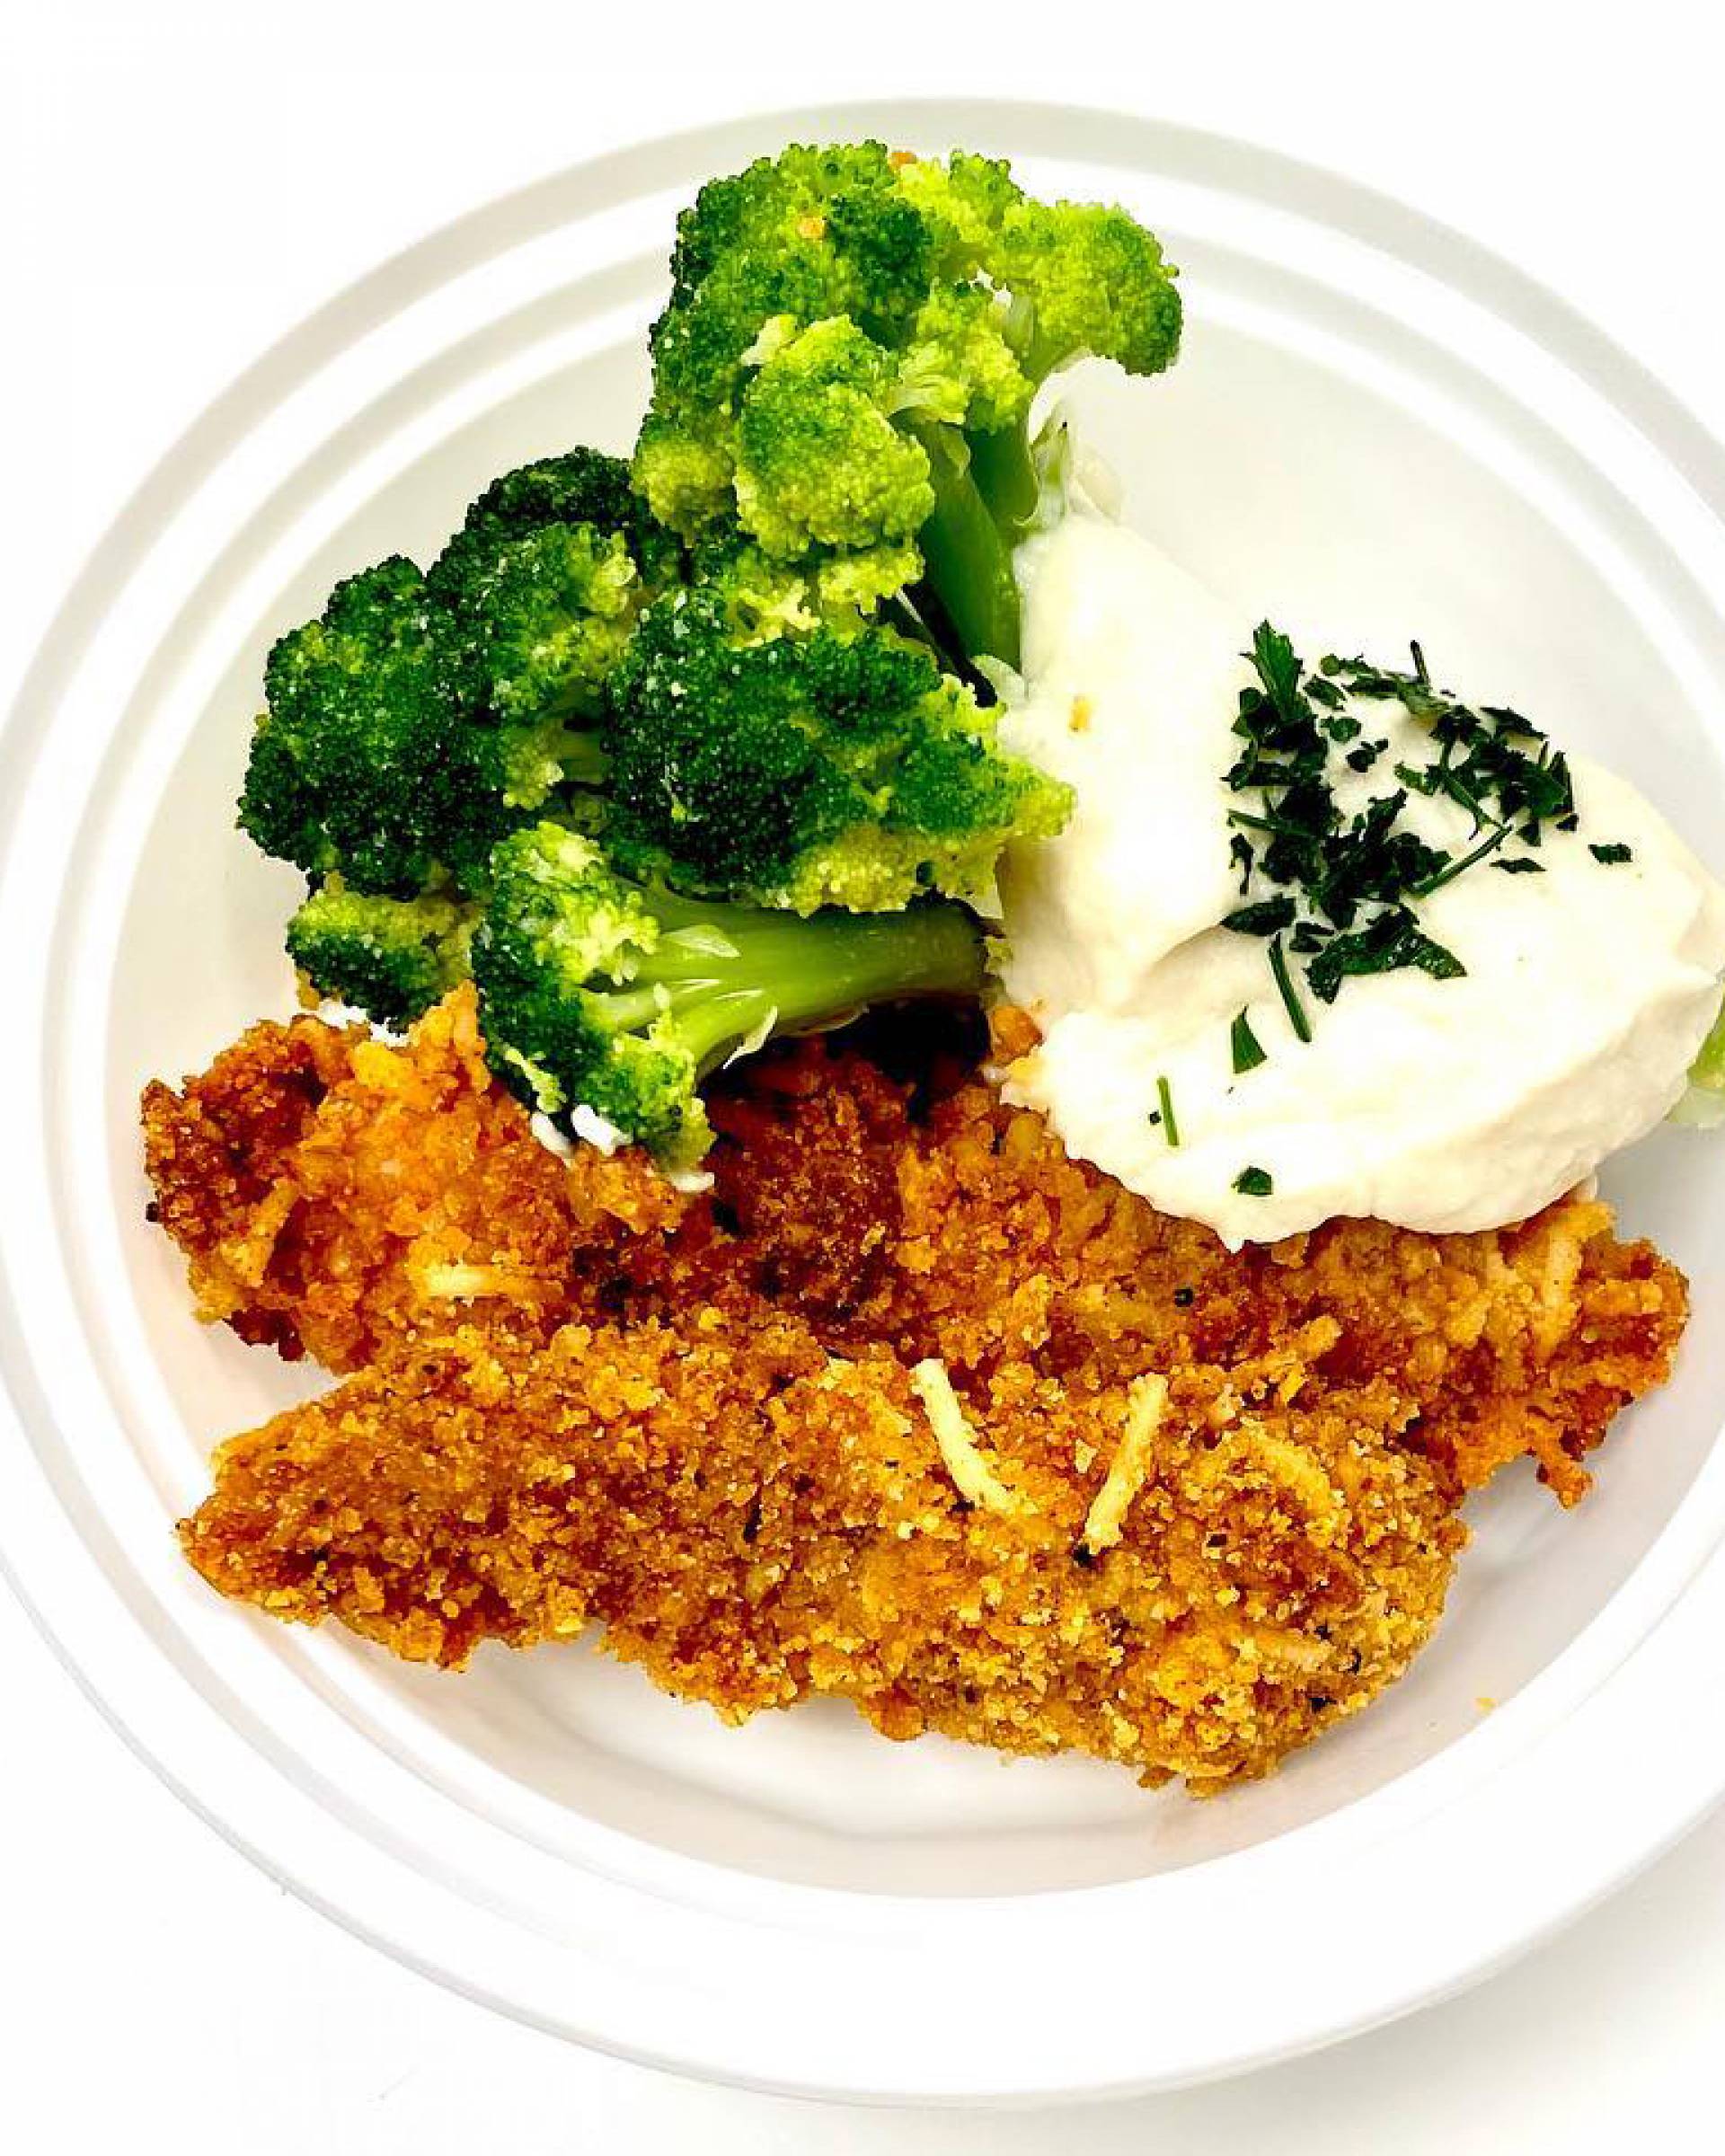 Chicken Tenders with Parsnip Mashed Potatoes and Broccoli Crowns - Low Fat